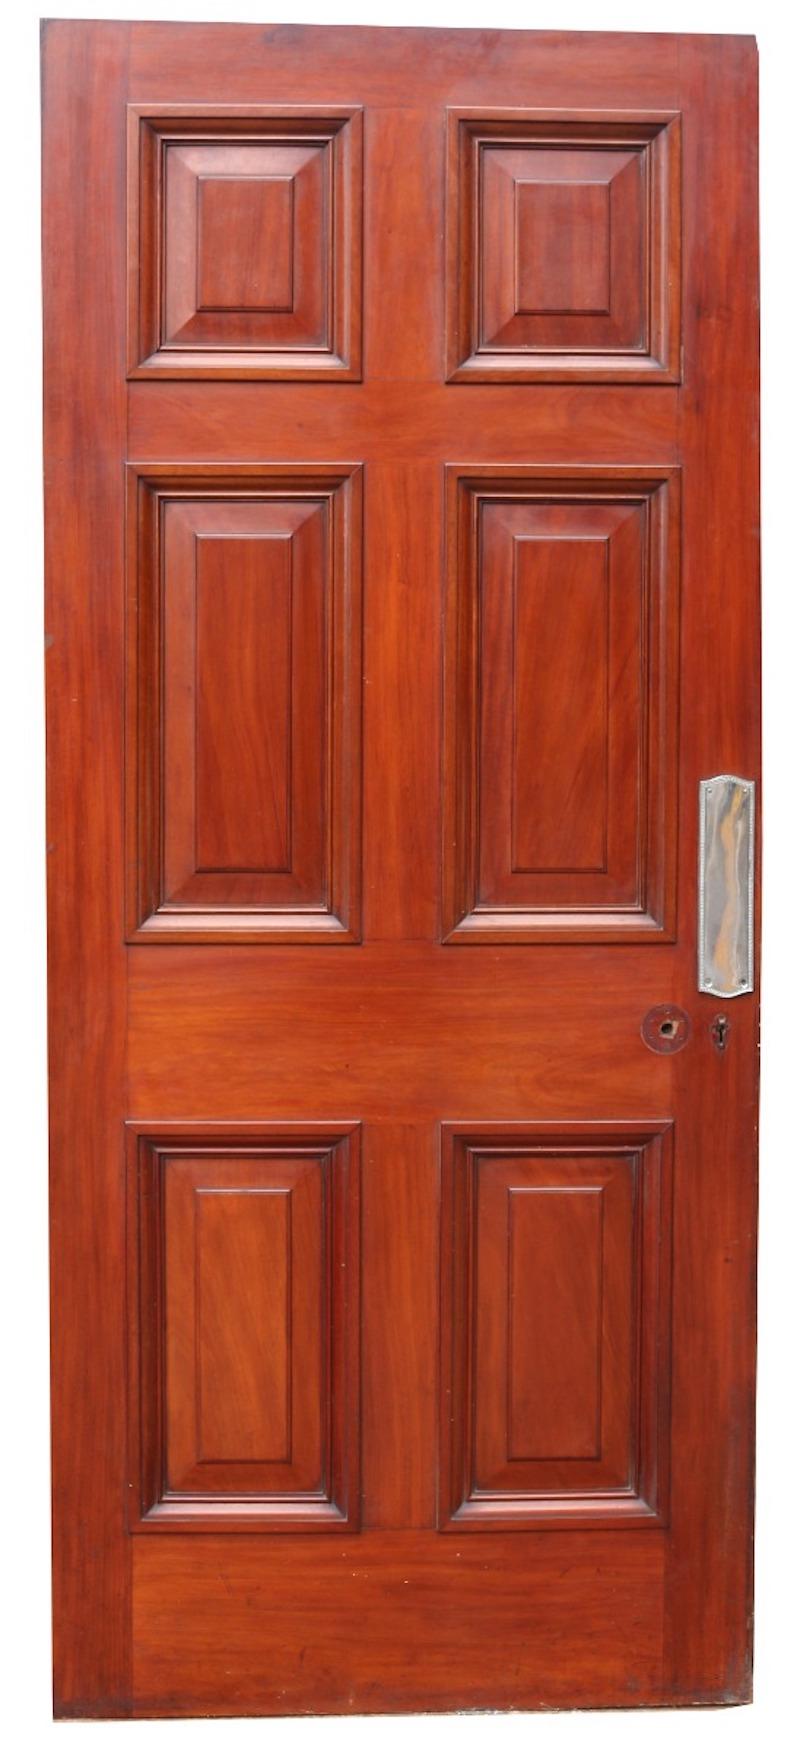 This beautiful Victorian Mahogany door has raised and fielded panels, chrome finger plate and a wax finish.